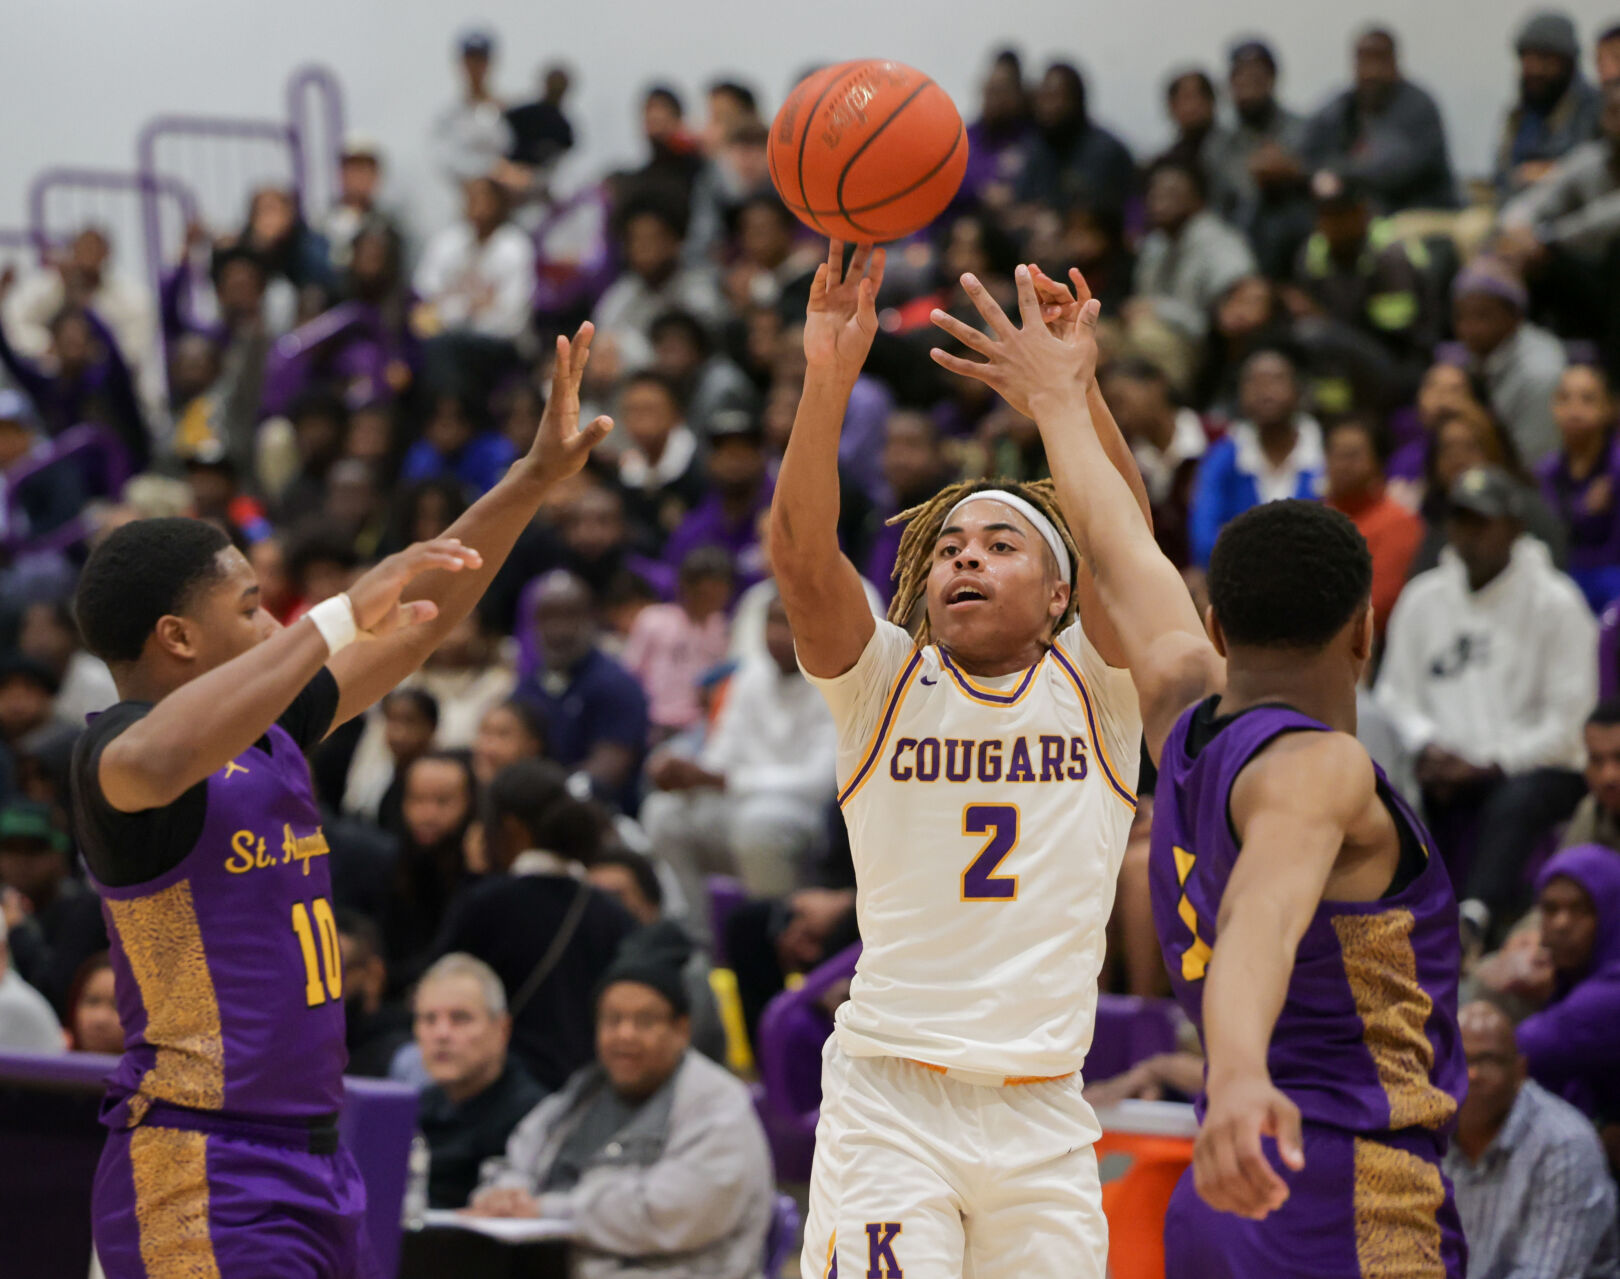 Edna Karr on Track to Clinch District 9-5A Boys Basketball Title